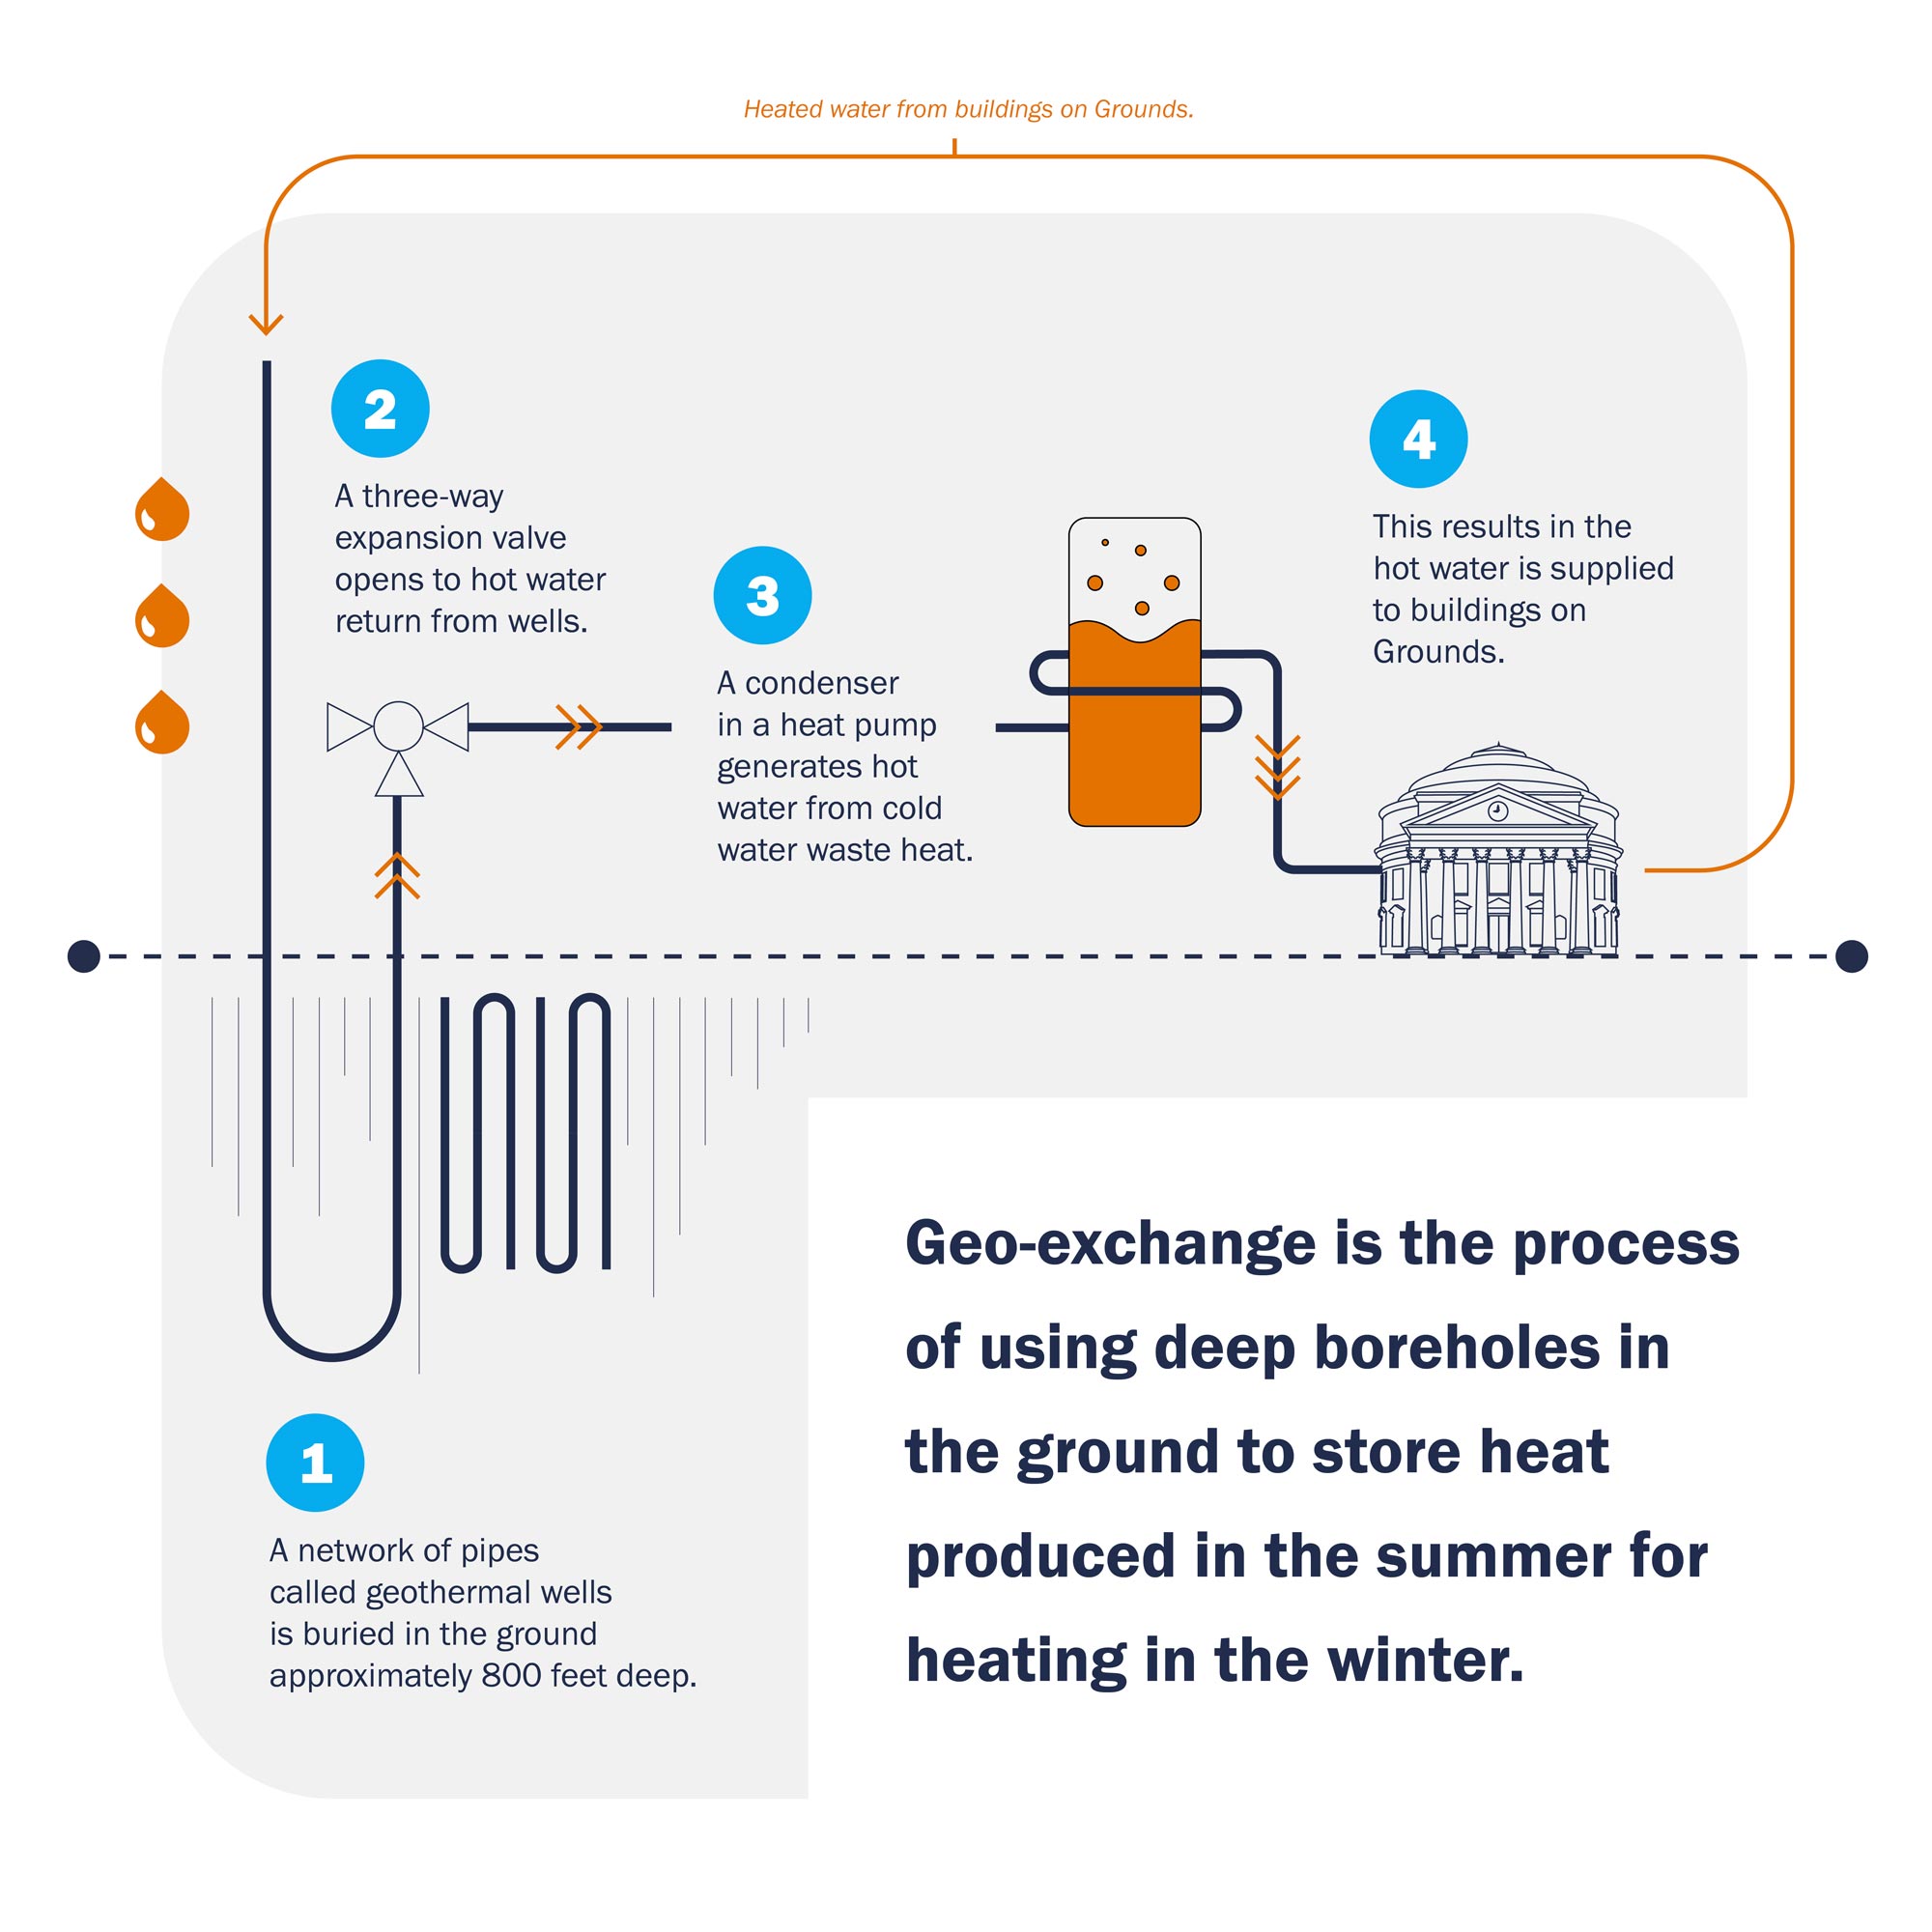 extensive flow chart showing the geo-exhchange process using deep boreholes in the ground to store heat produced in the summer. step 1: a network of pipes called geothermal wells is buried in the ground approximately 800 feet deep. step 2: a three-way expansion valve opens to hot water return from wells.  Step 3: A condenser in a heat pump generates hot water from cold water wast heat.  Step 4: This results in the hot water is supplied to buildings on grounds